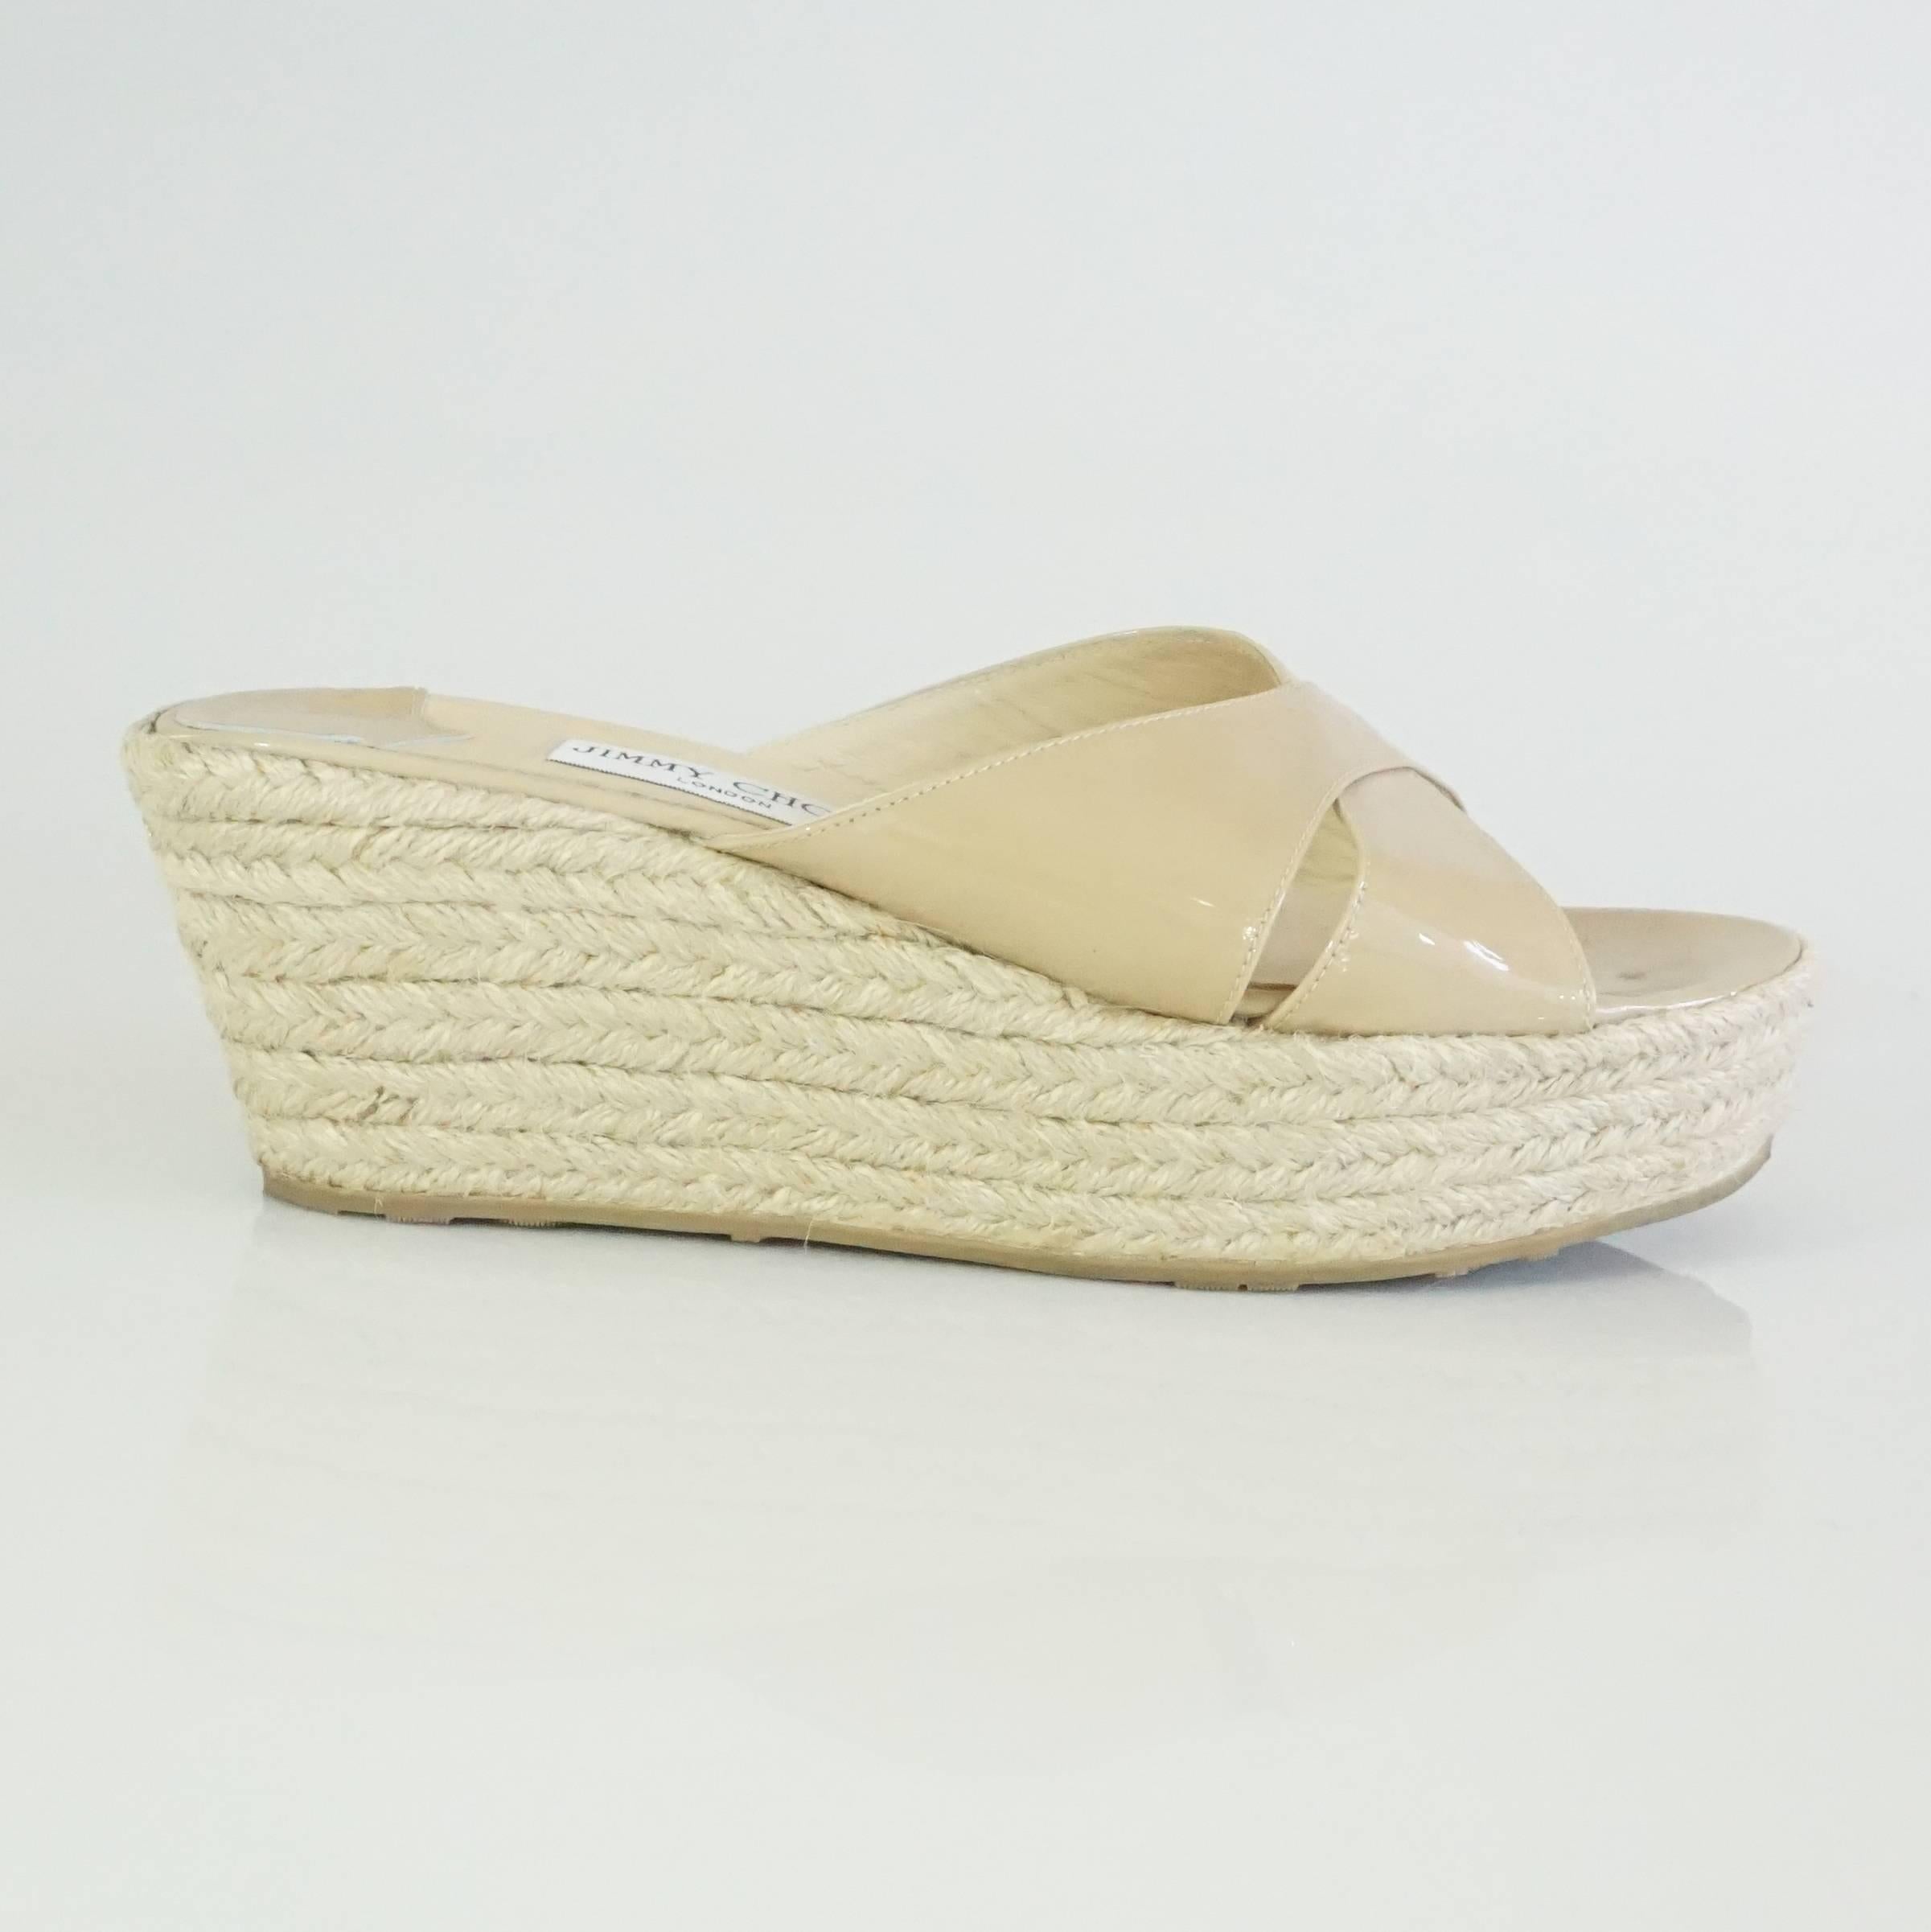 Jimmy Choo Tan Patent Straw Wedges - 40. These wedges are a staple piece for any closet and are very versatile. They feature a slight incline, crossing front straps, and a small gold 